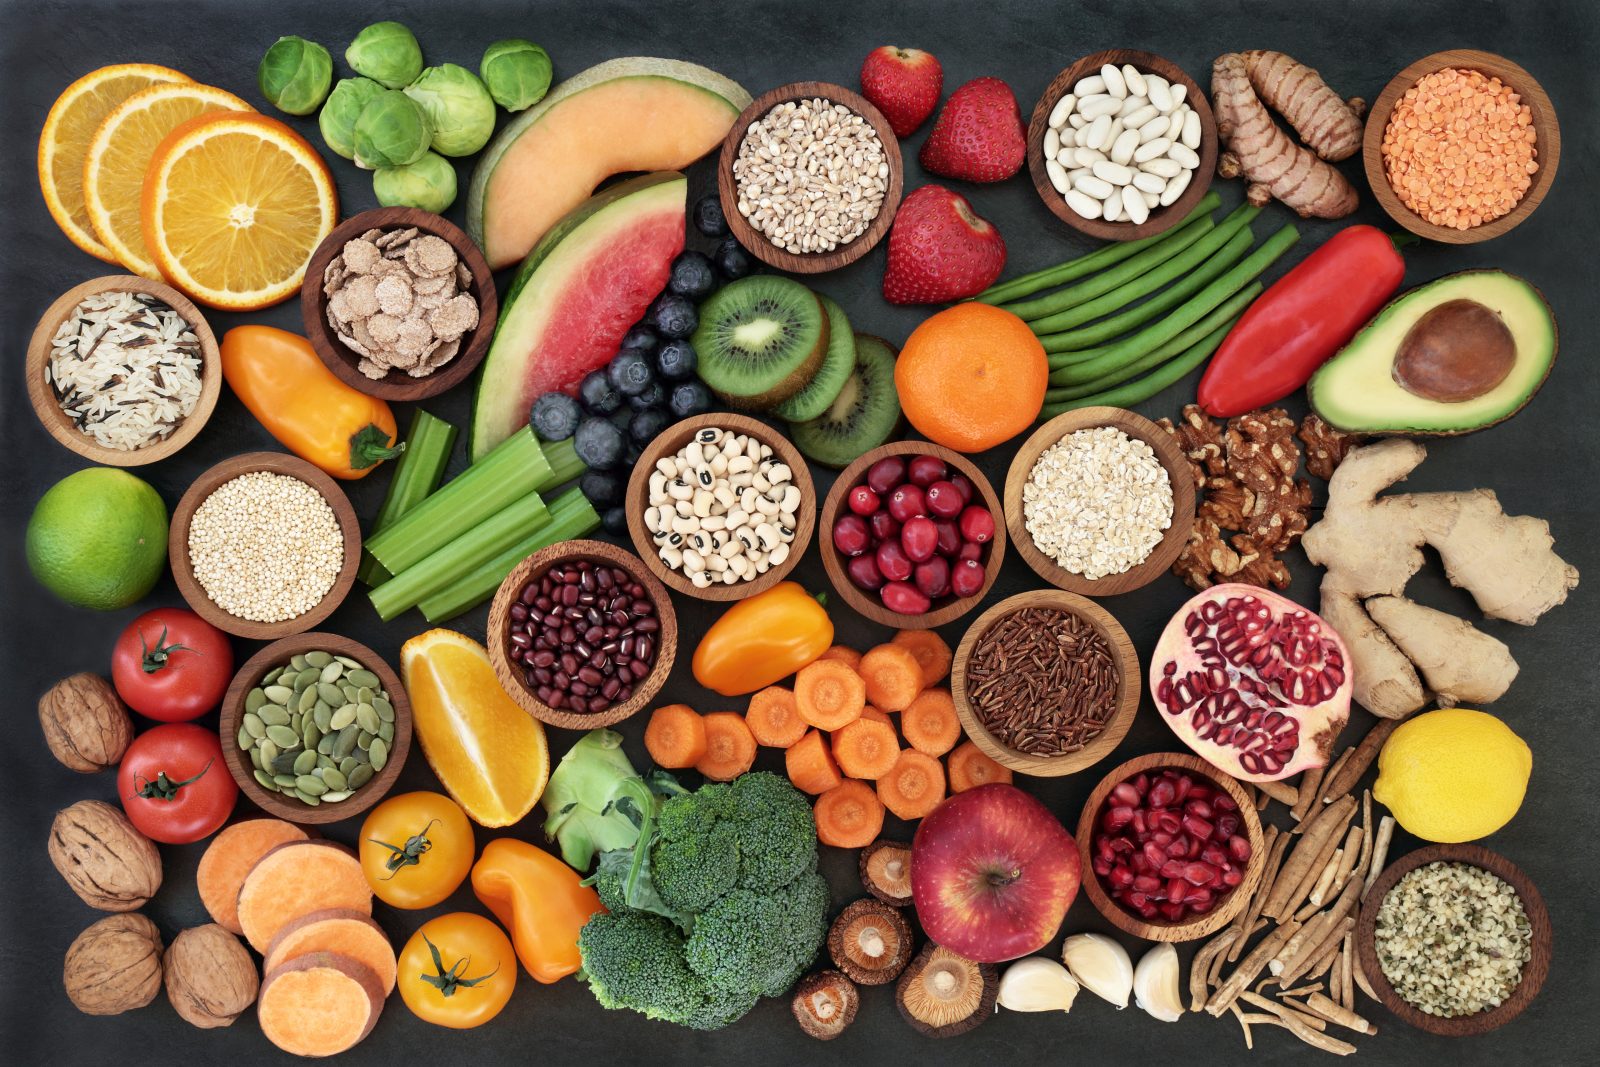 A spread of fruit, vegetables, seeds, pulses, grains, cereals, herbs & spices.